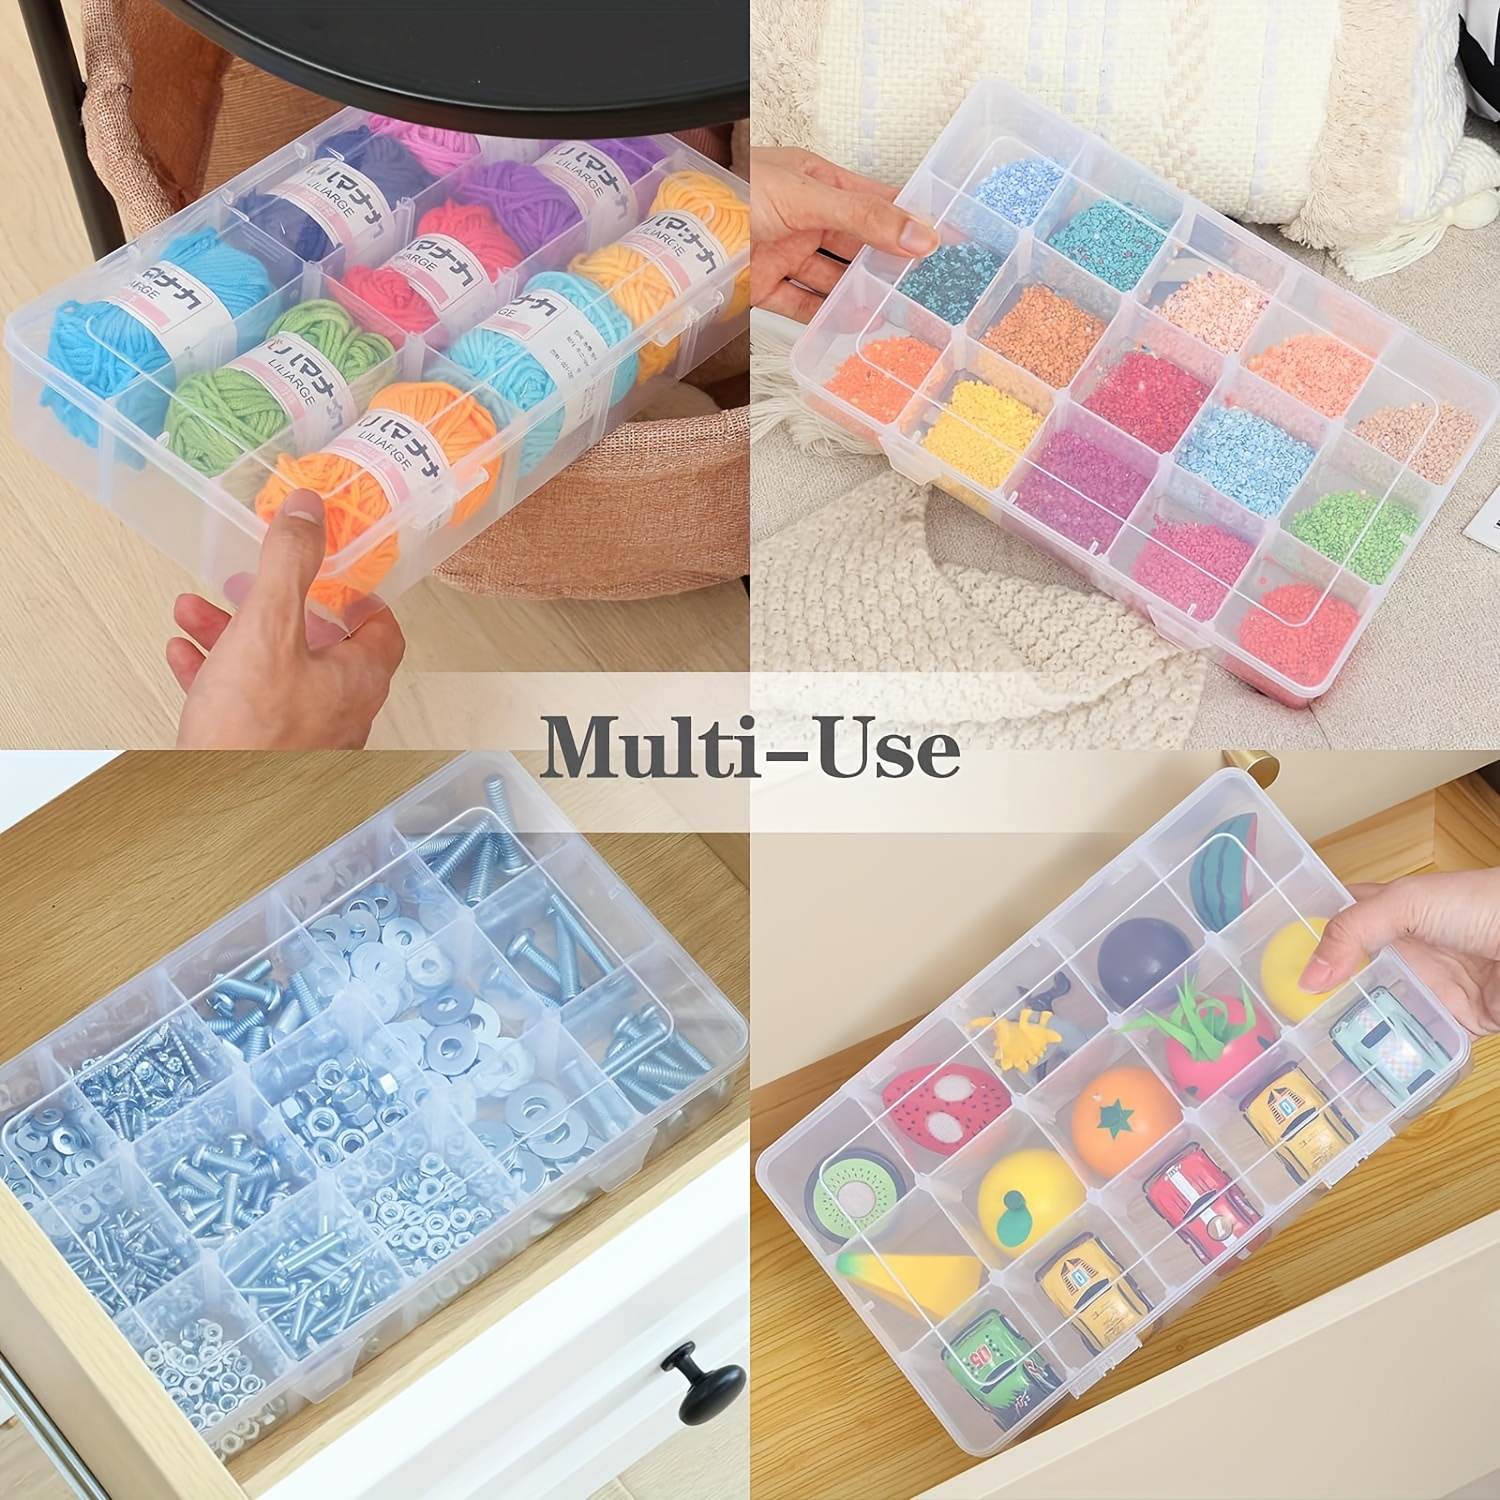 Large Grids Organizer Box for Washi Tape, 15 Compartments Storage